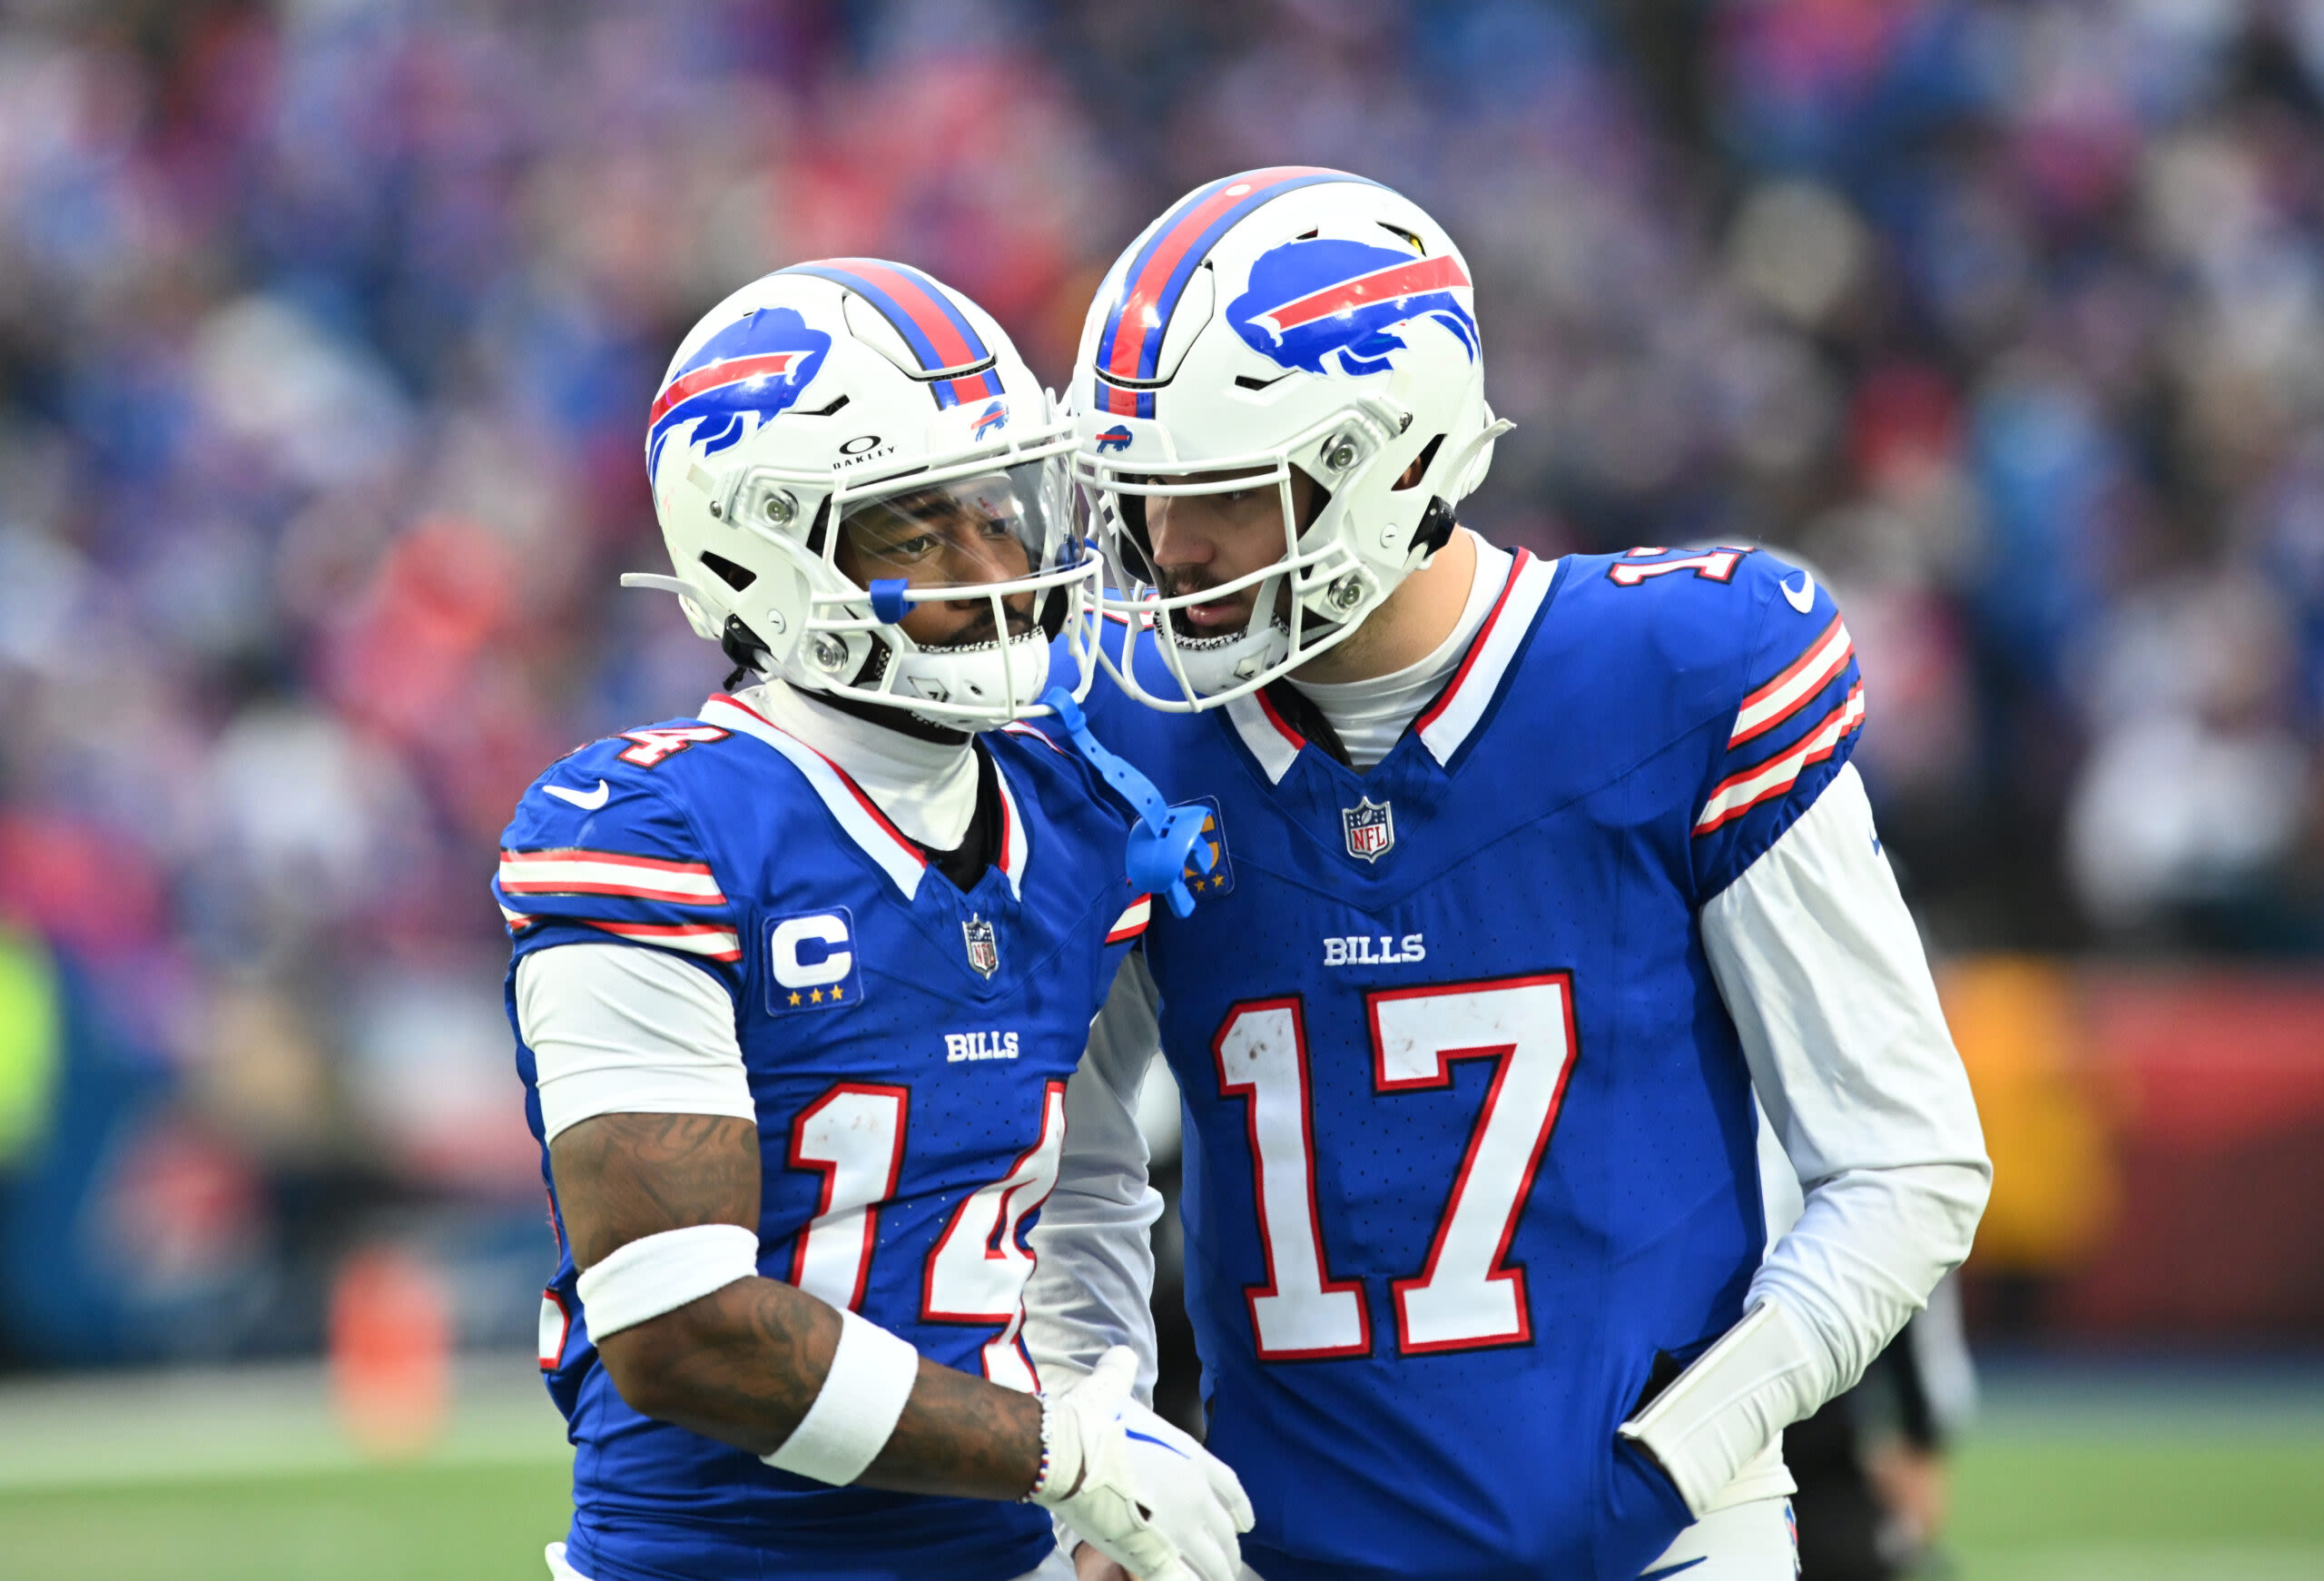 Stefon Diggs was ‘happy’ to be traded to Texans, but praises Bills & Josh Allen